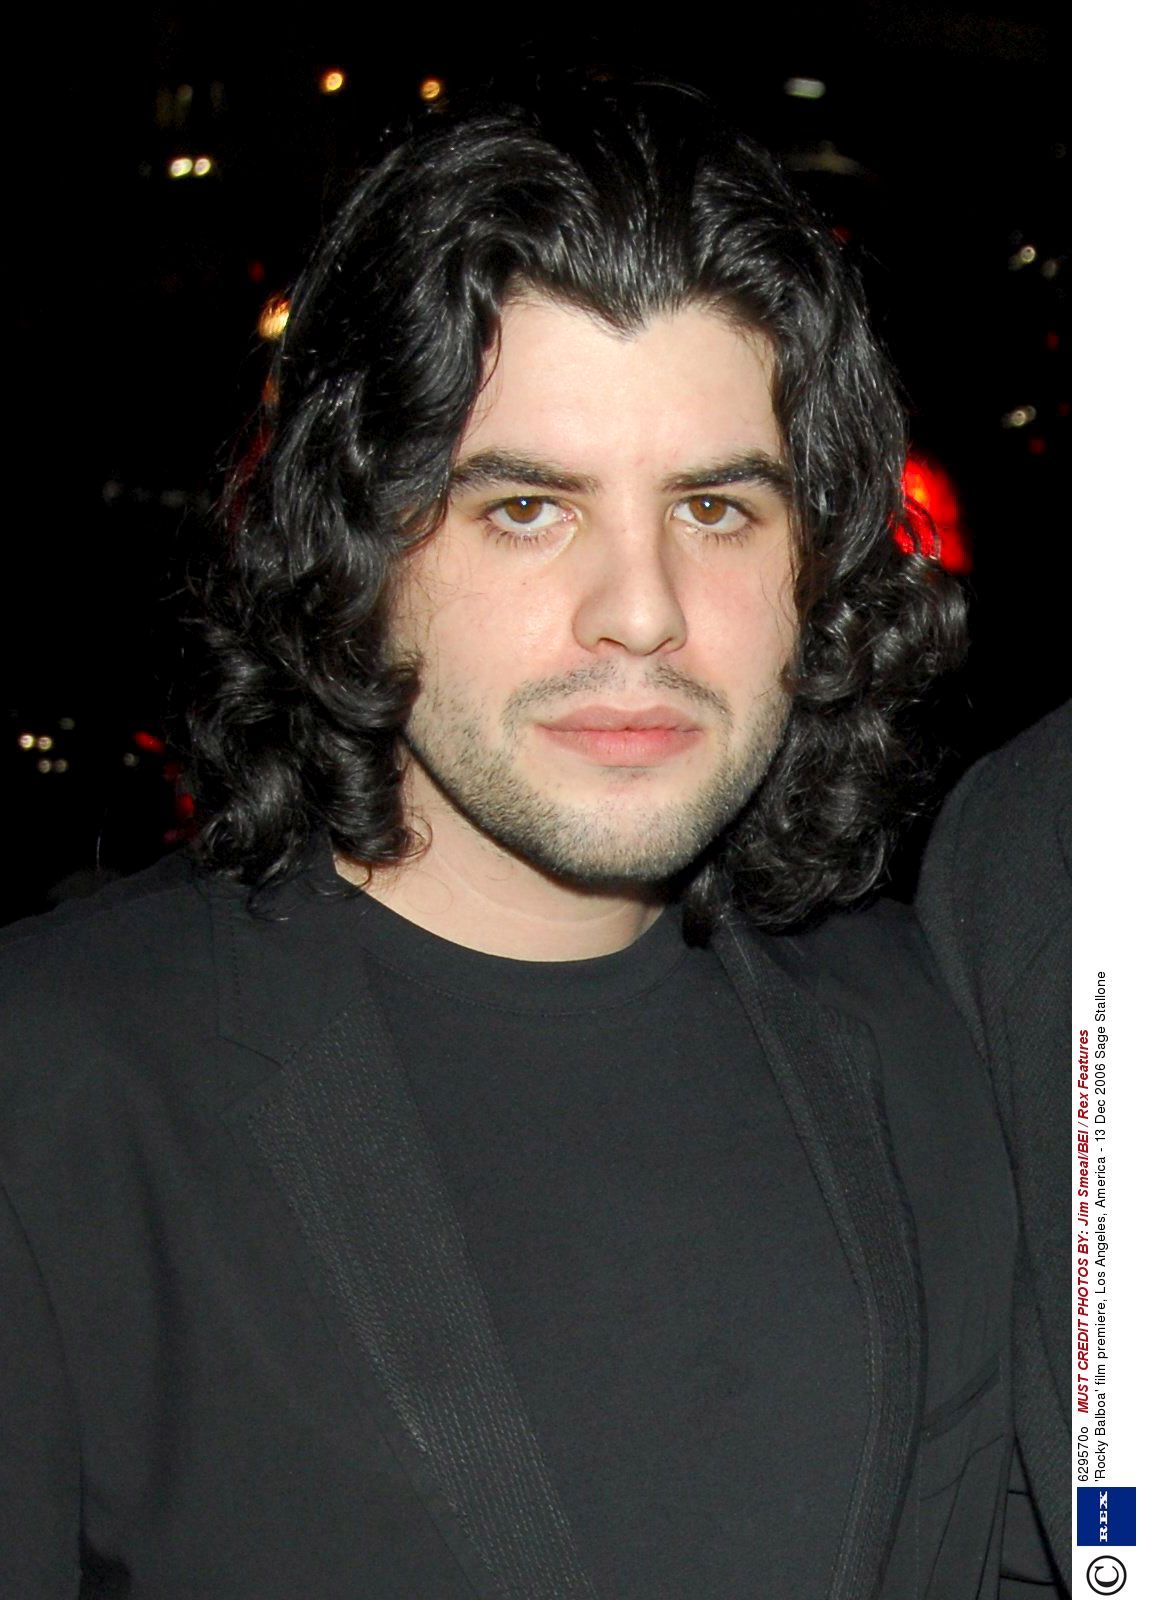 Sage Stallone death linked to surgery?